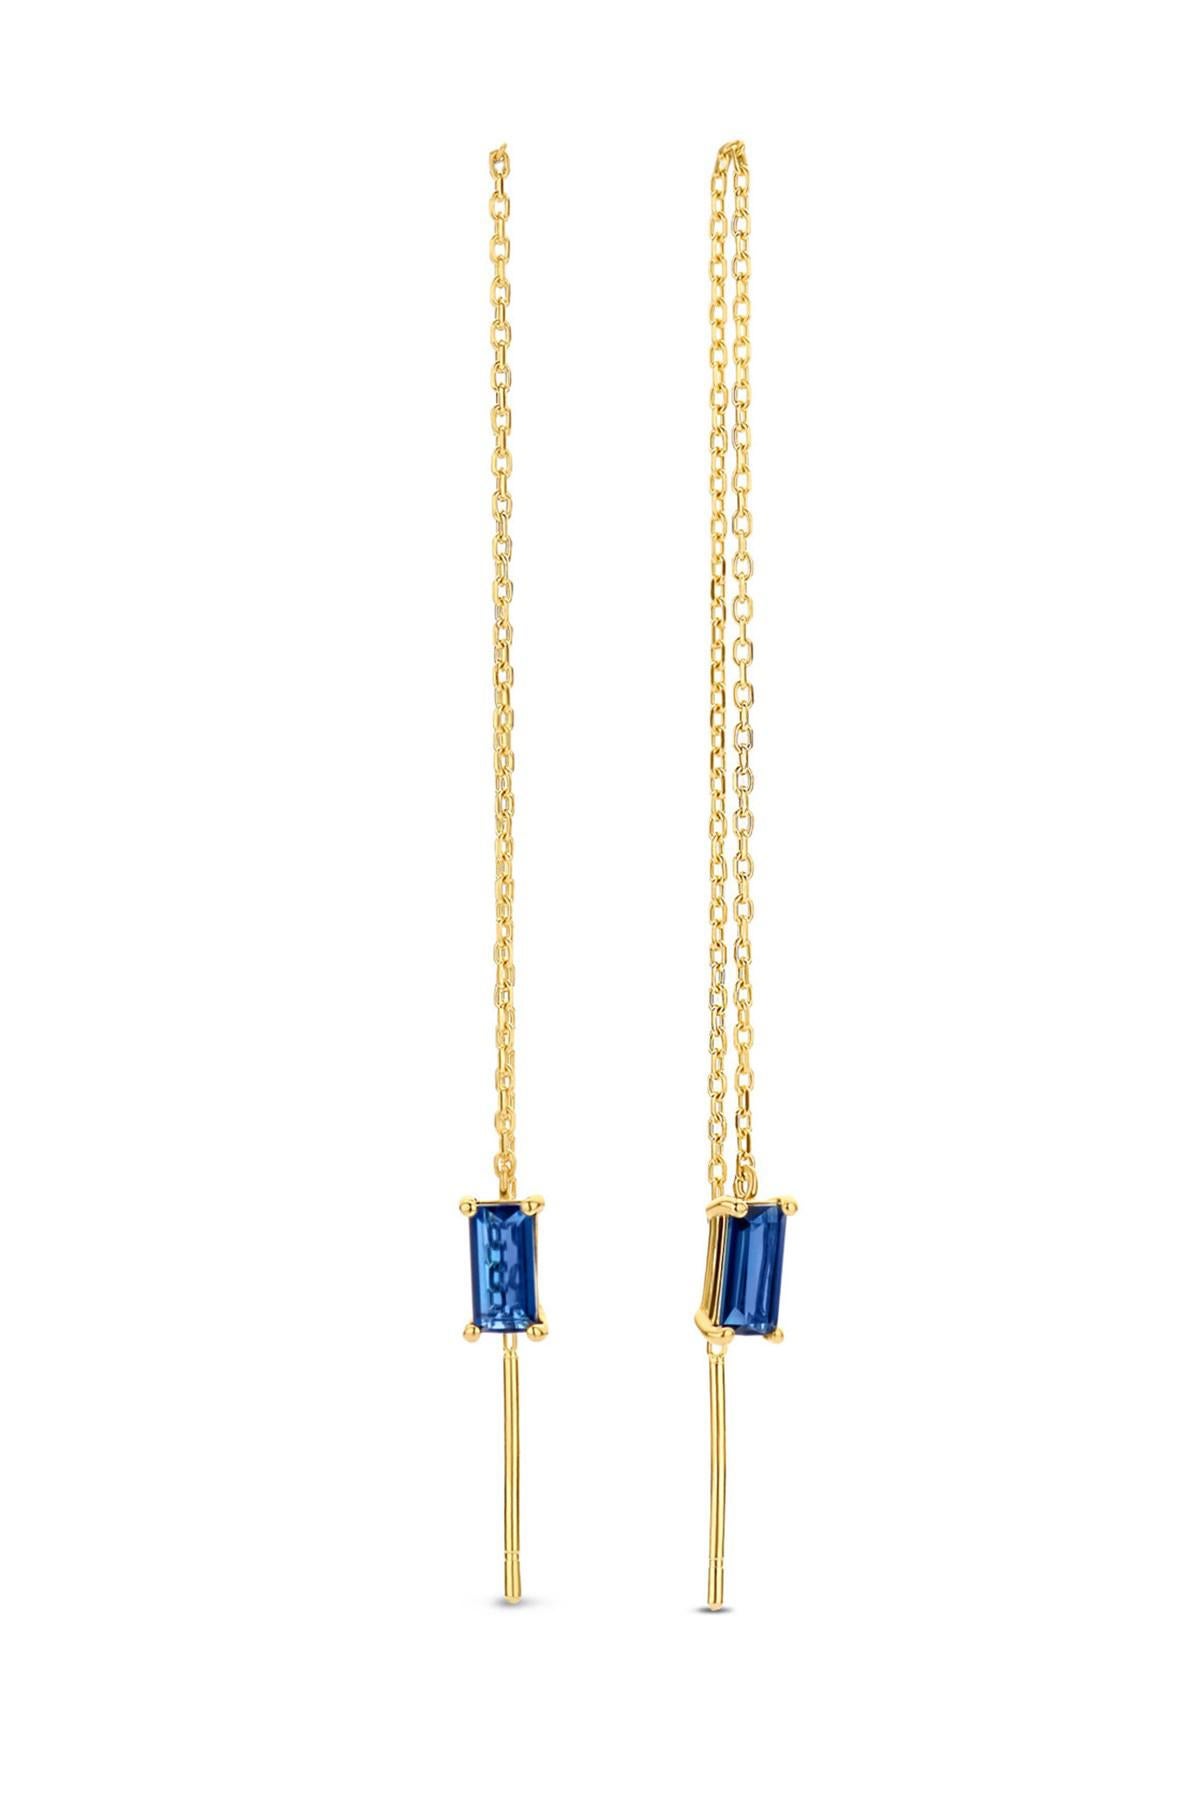 Modern 14k Solid Gold Drop Earrings with Blue Sapphire, Chain Gold Earrings For Sale